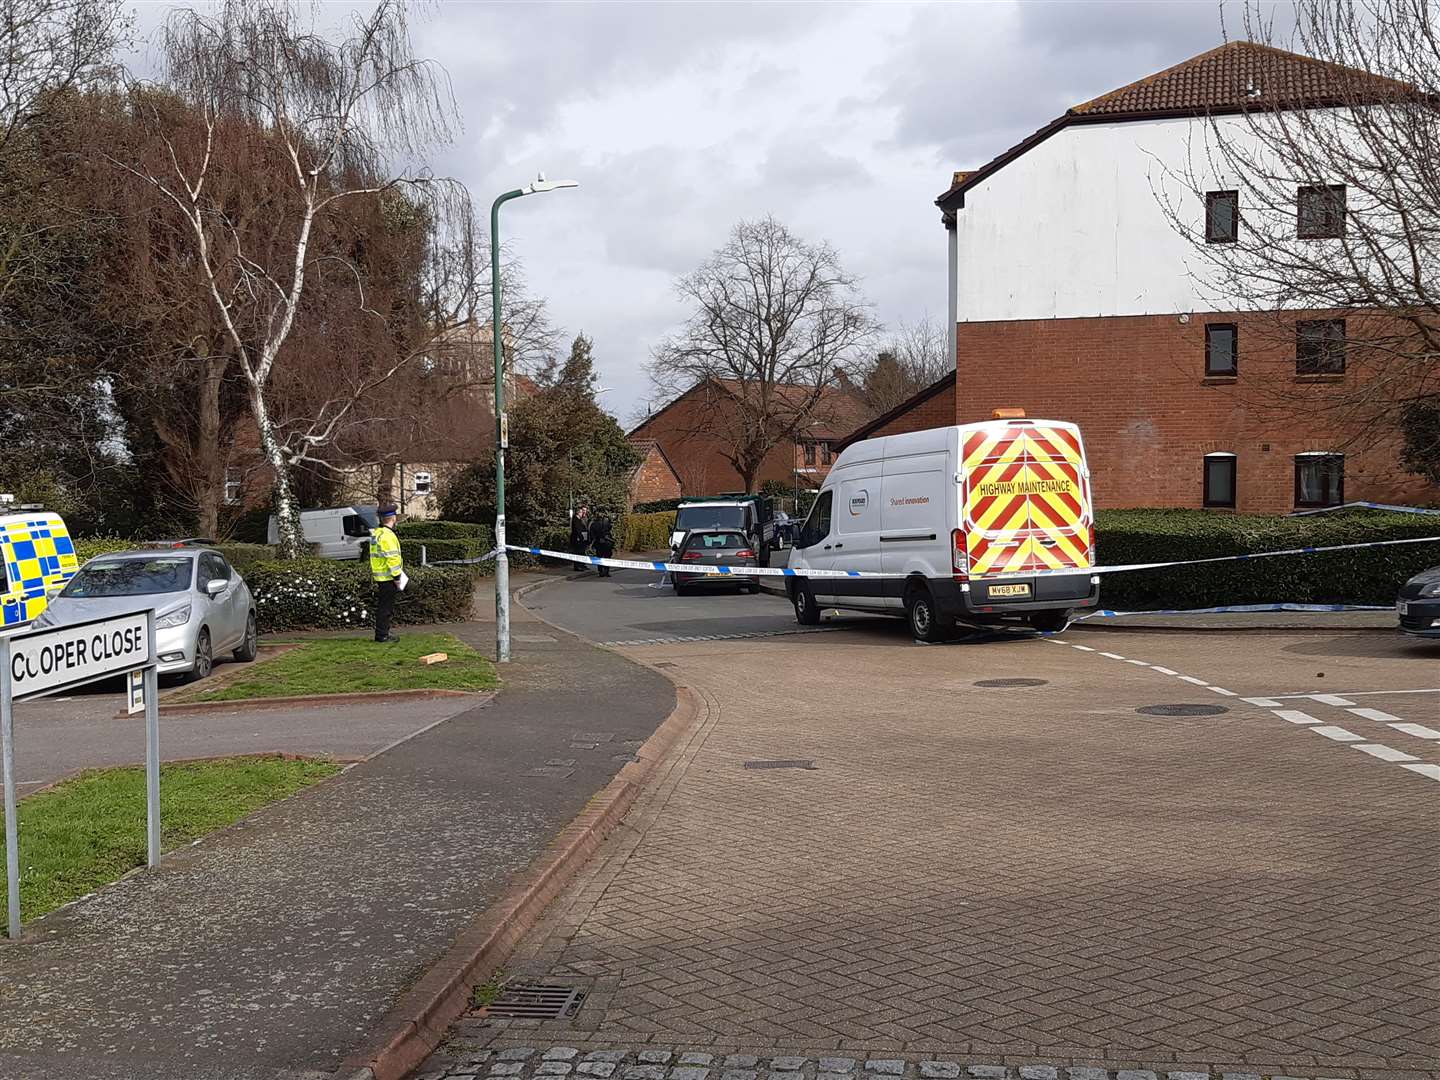 Police cordoned off an area outside Cooper Close, Greenhithe following a suspected shooting